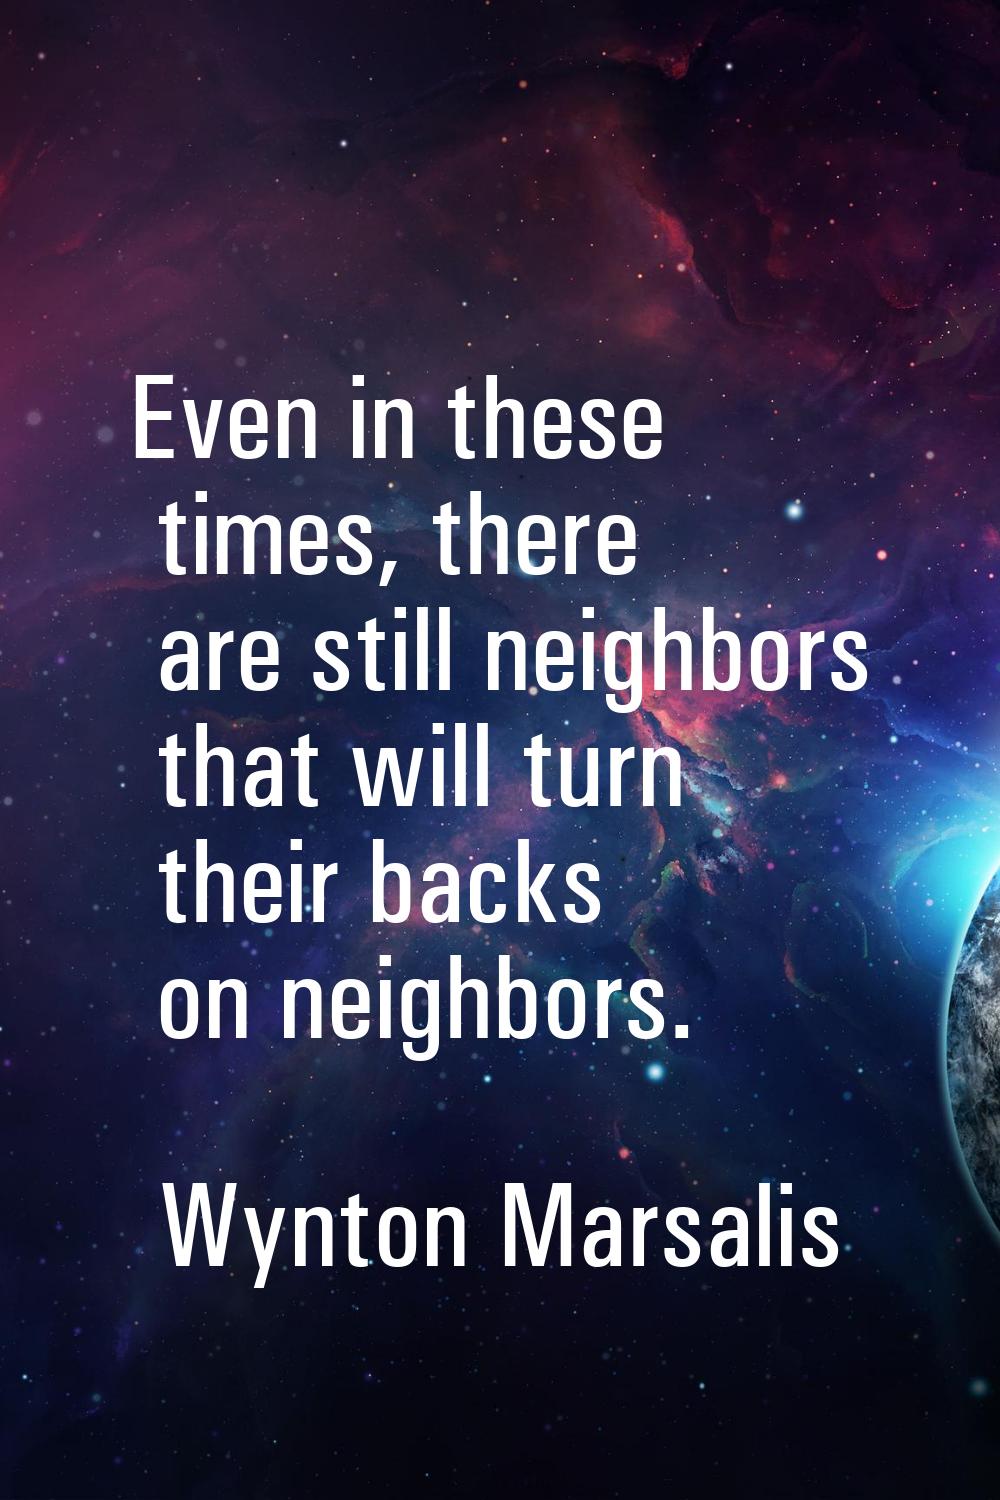 Even in these times, there are still neighbors that will turn their backs on neighbors.